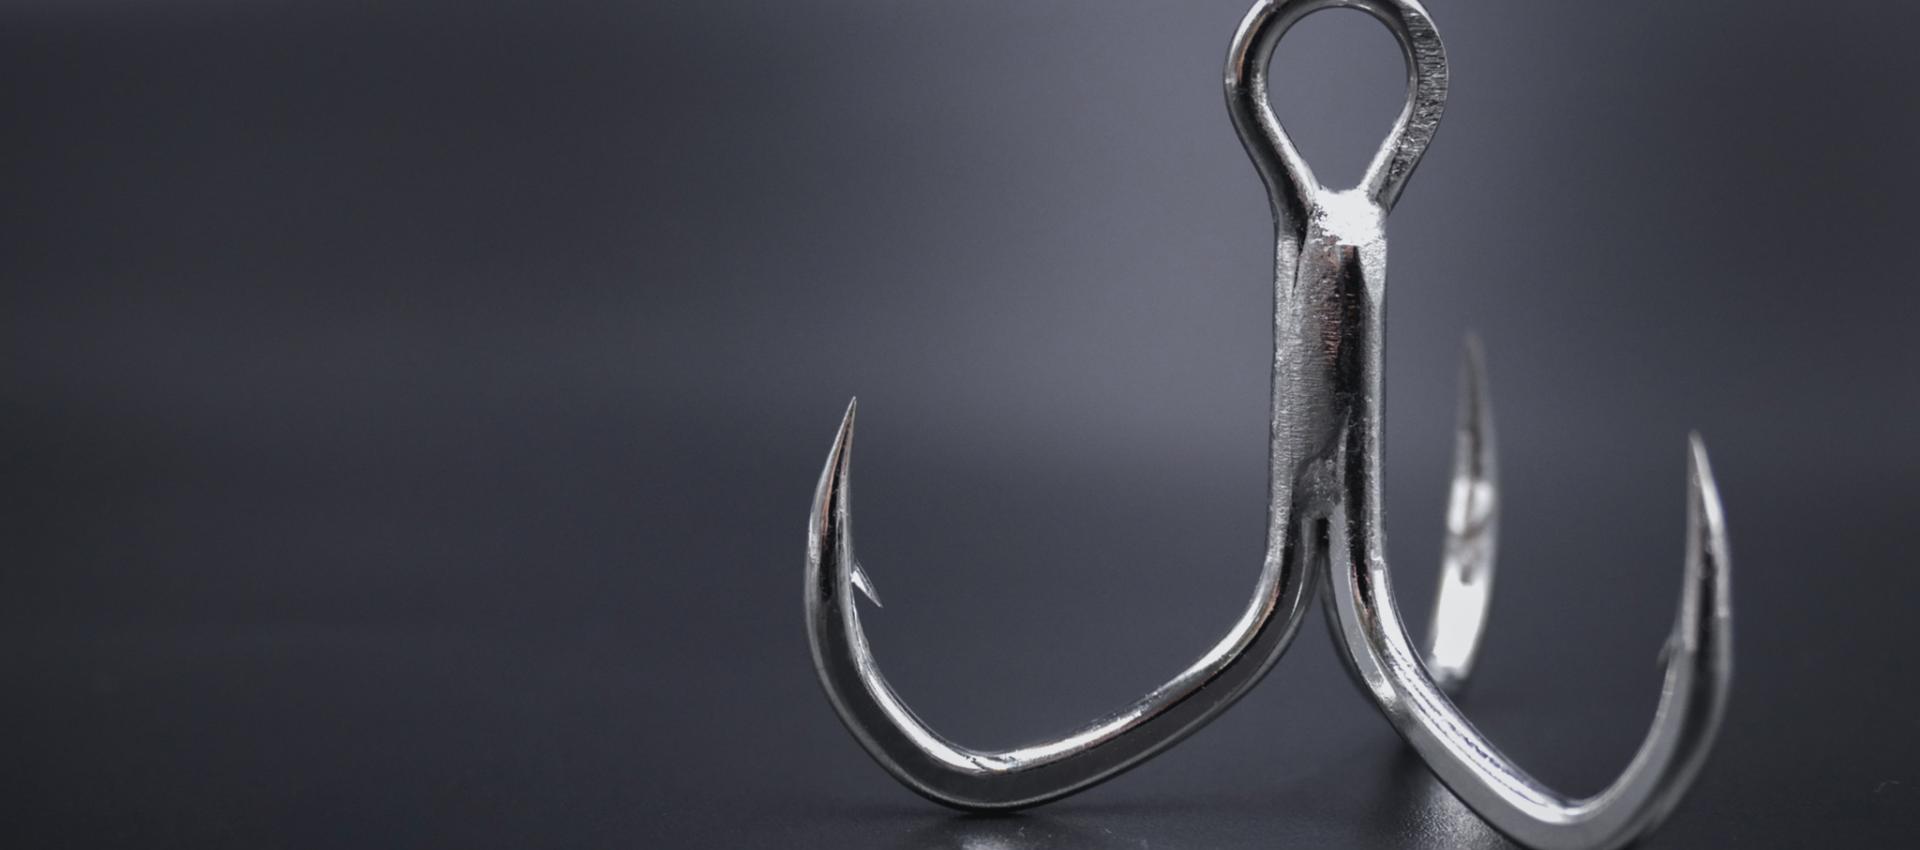 Buy Vmc Hooks Products Online in Mumbai at Best Prices on